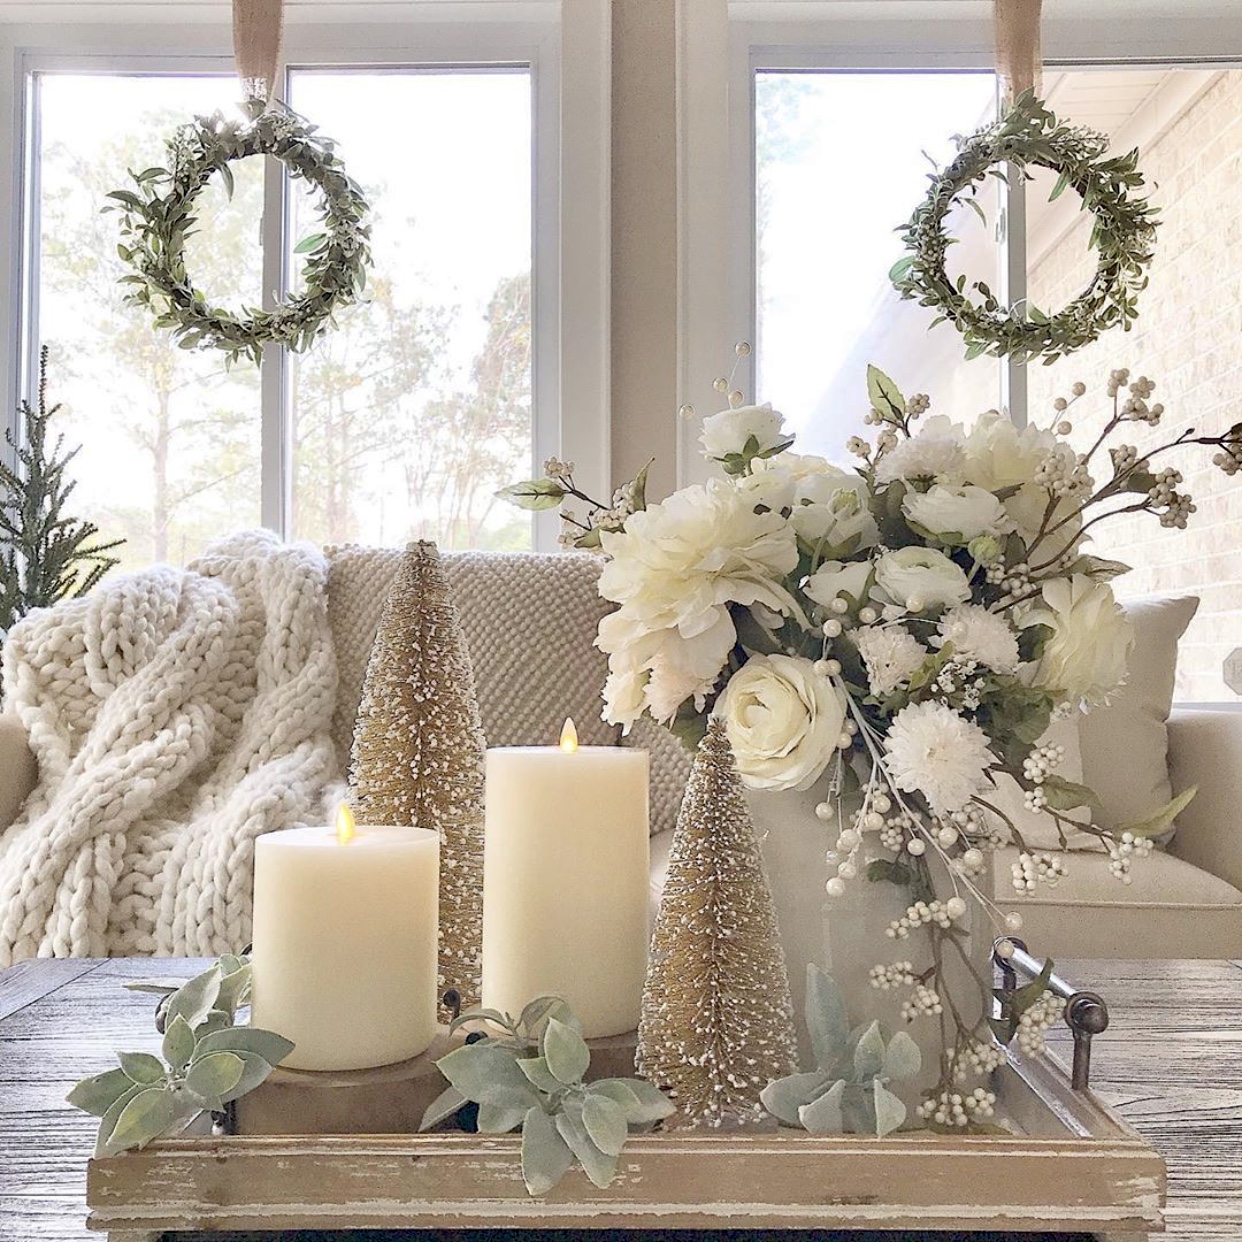 Tray on coffee table with candles, bottle brush Christmas trees and a white floral arrangement.